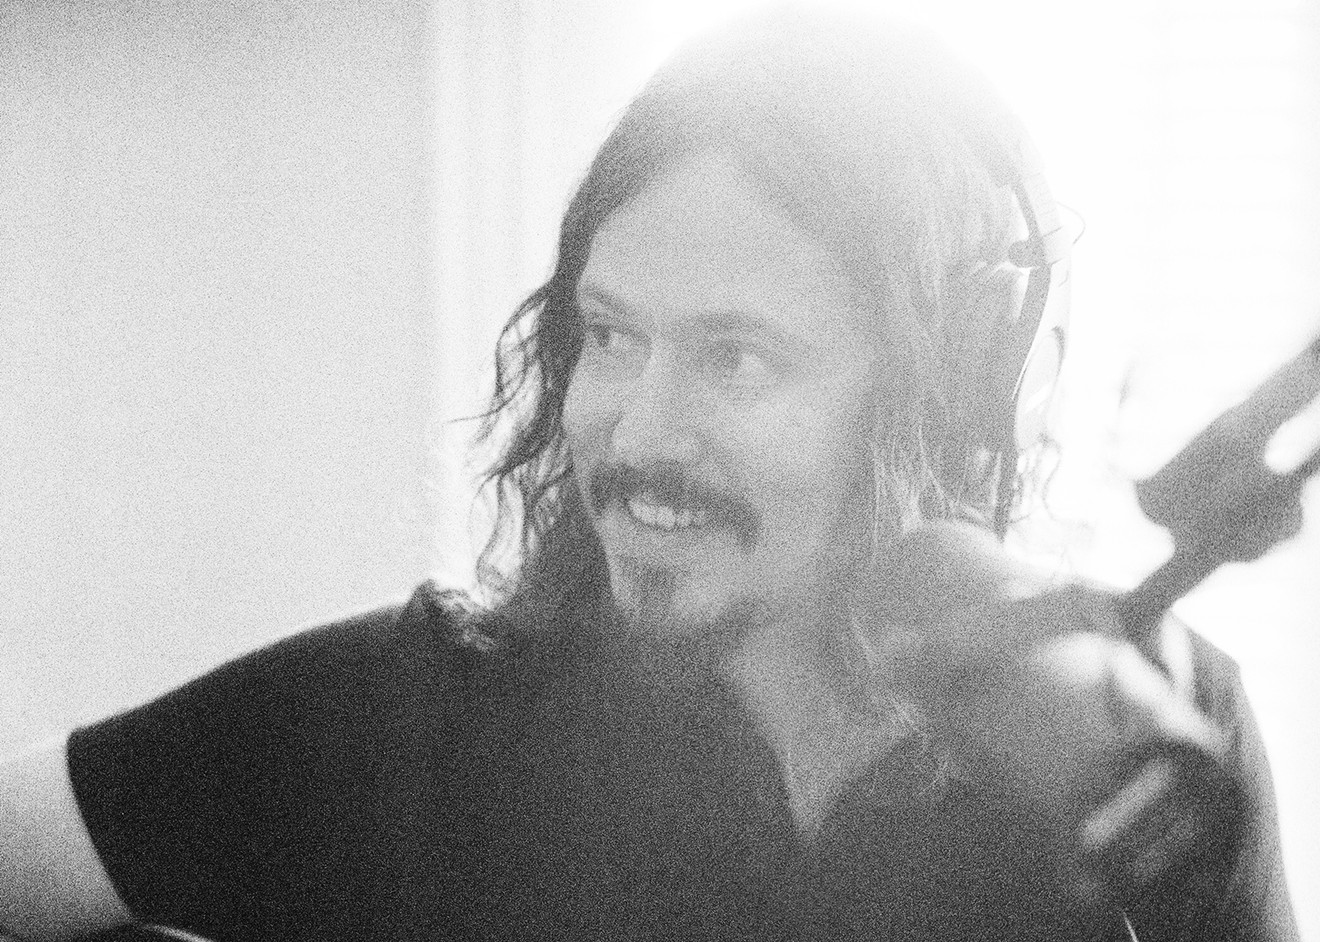 John Paul White is scheduled to perform on Monday, June 10, at the Musical Instrument Museum.